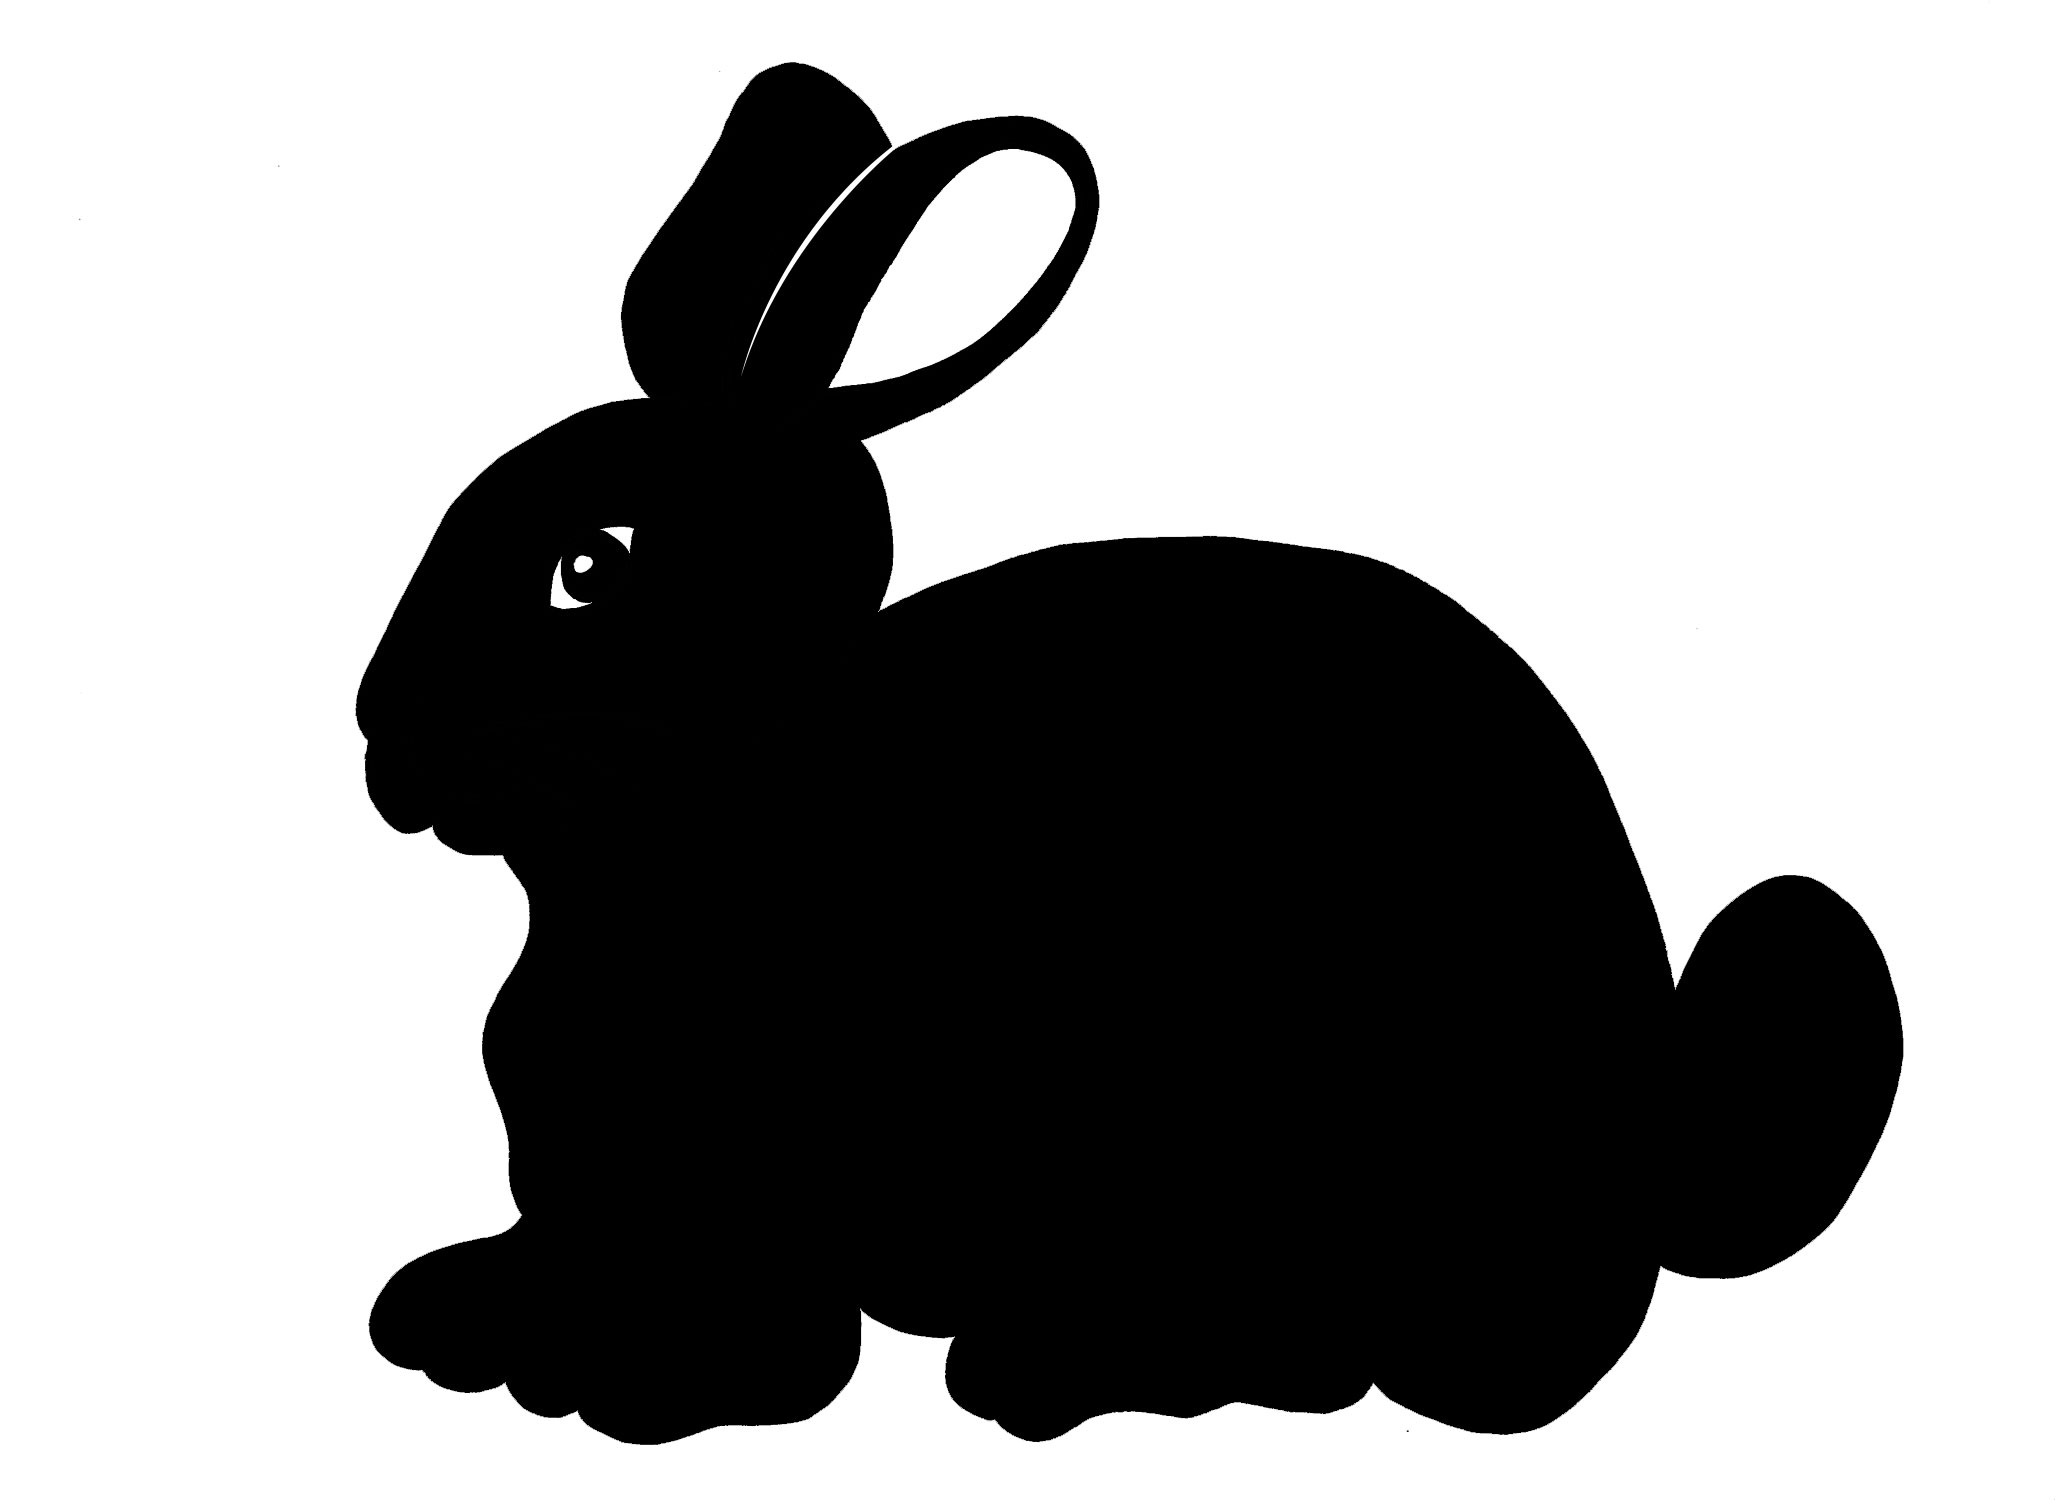 Rabbit Silhouette Images - Clipart library - Clipart library